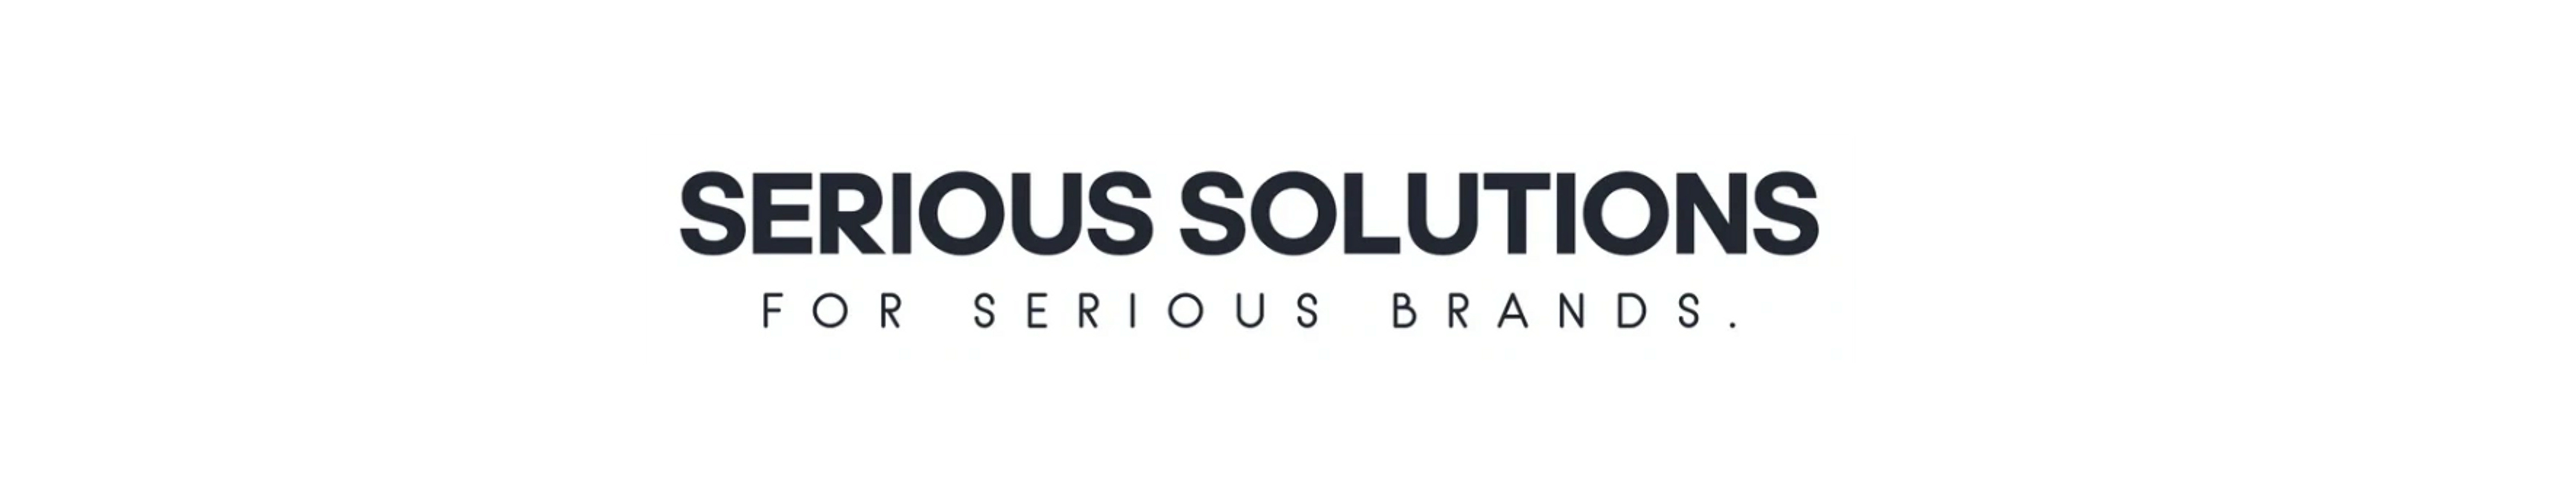 Serious solutions for seriuos brands